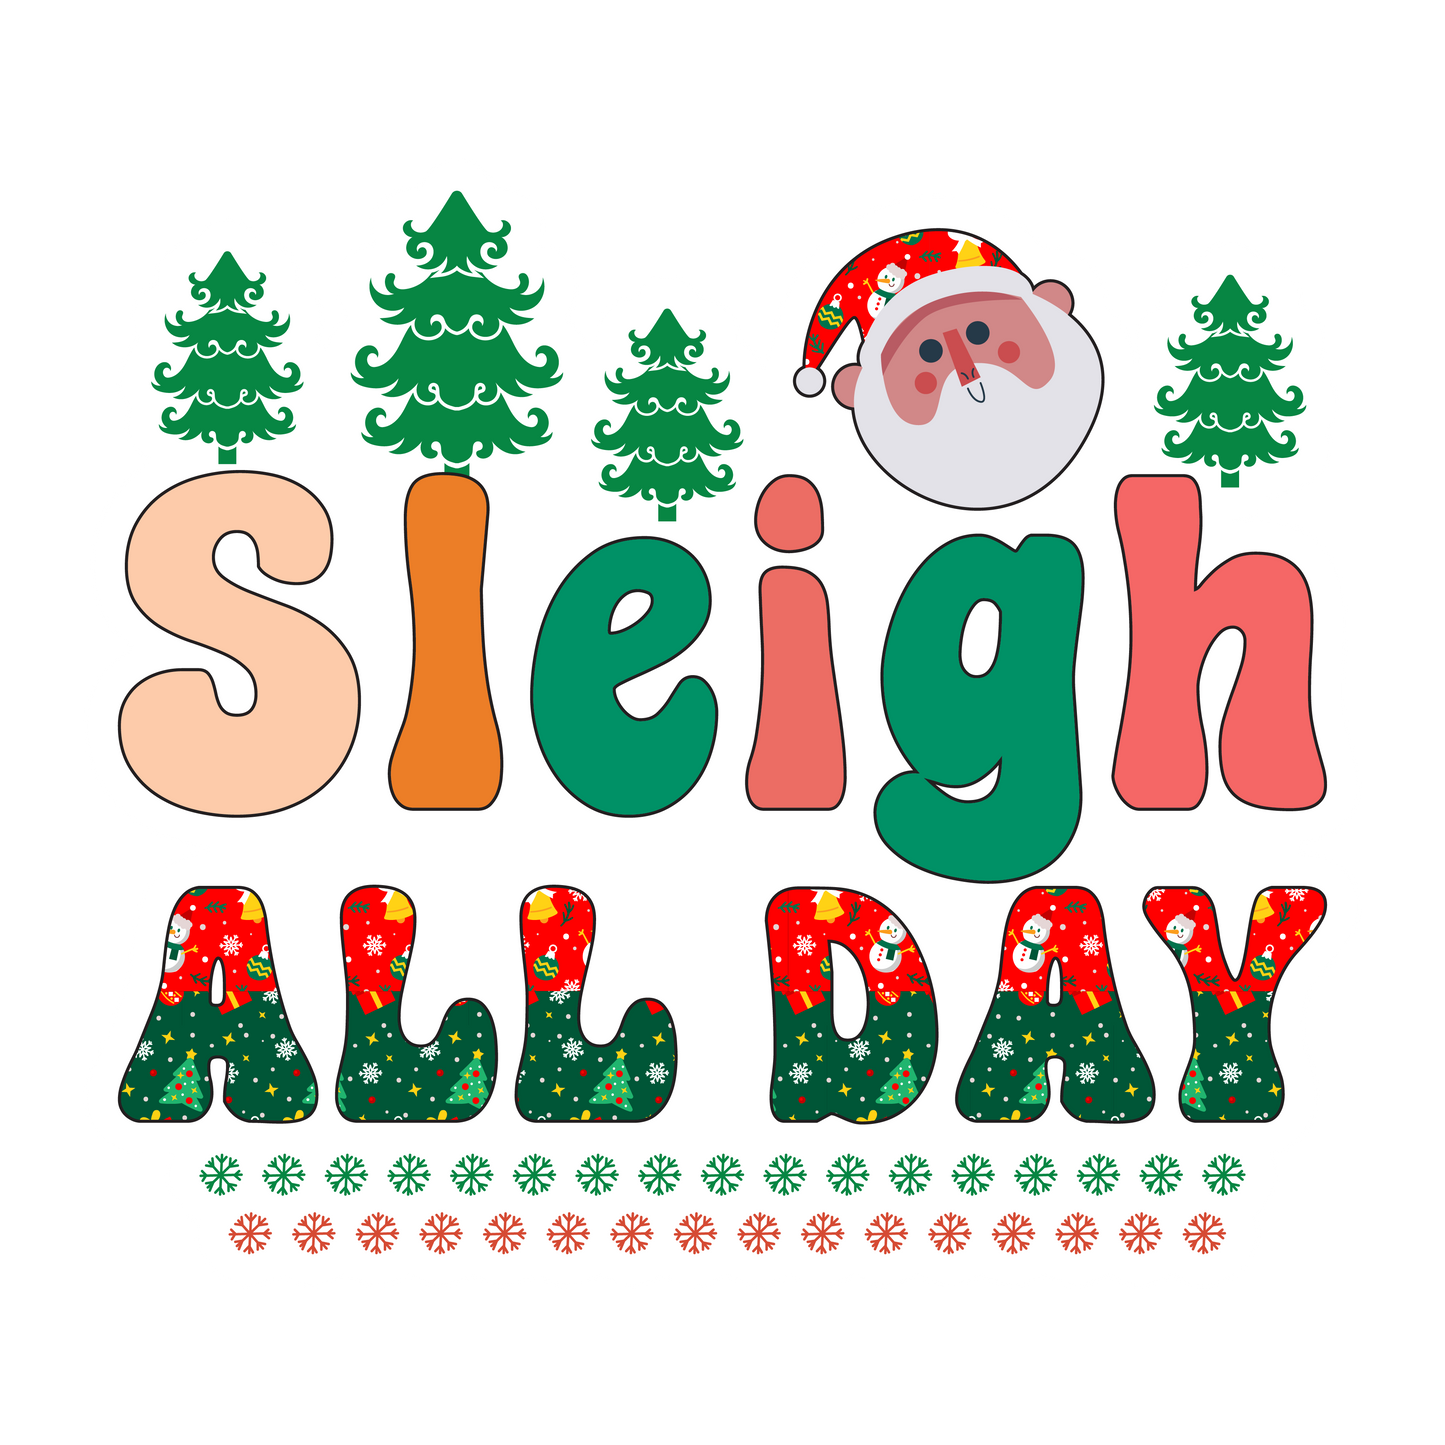 Stickers - Sleigh All Day Sticker, Christmas Stickers